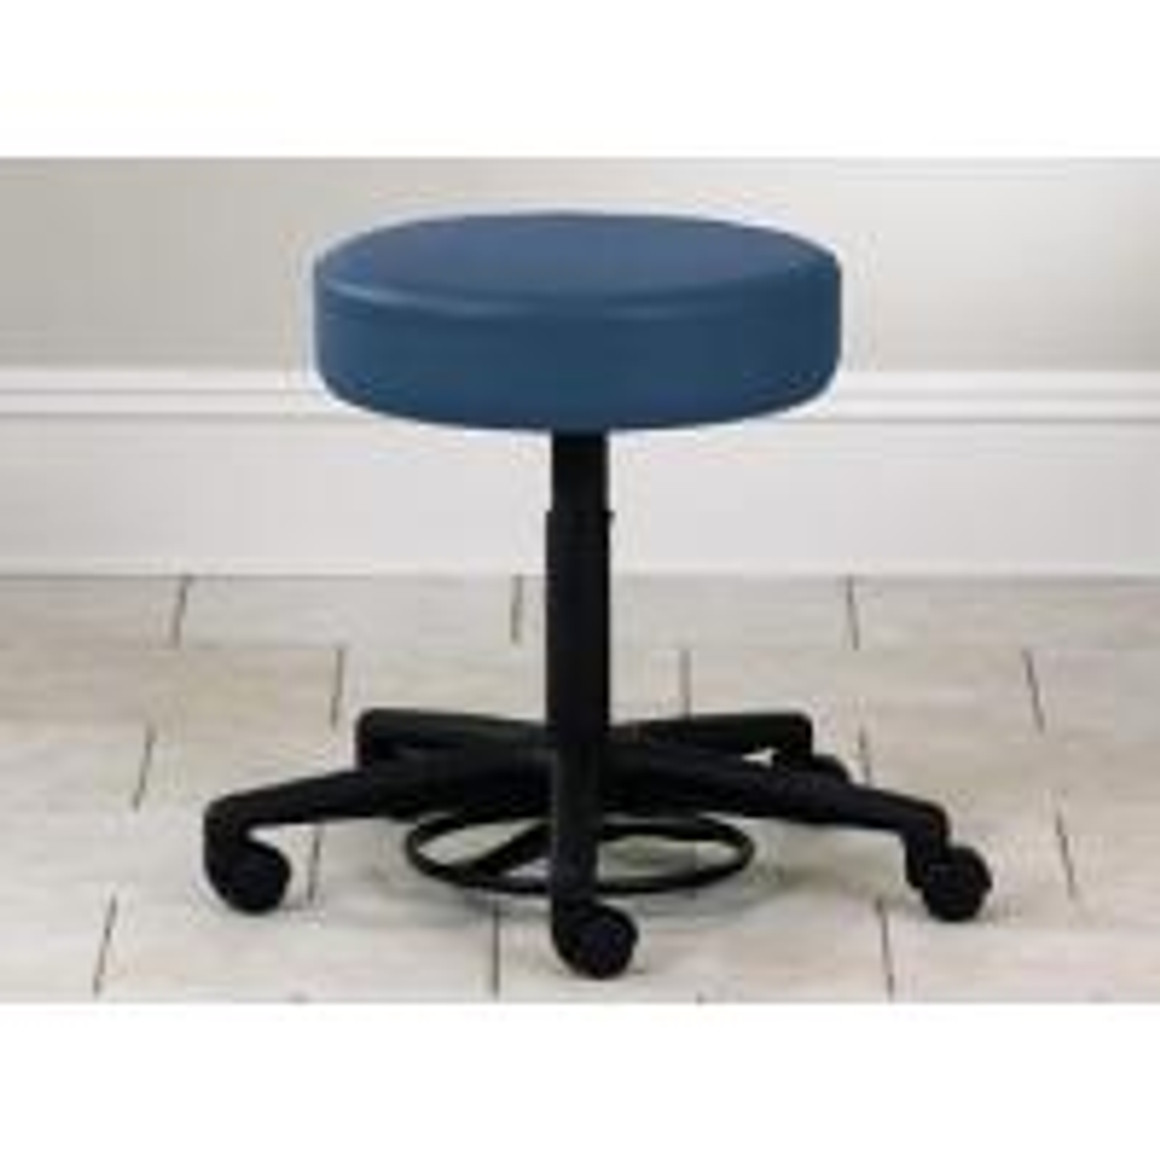 Clinton Foot Activated Pneumatic Stool, Allspice